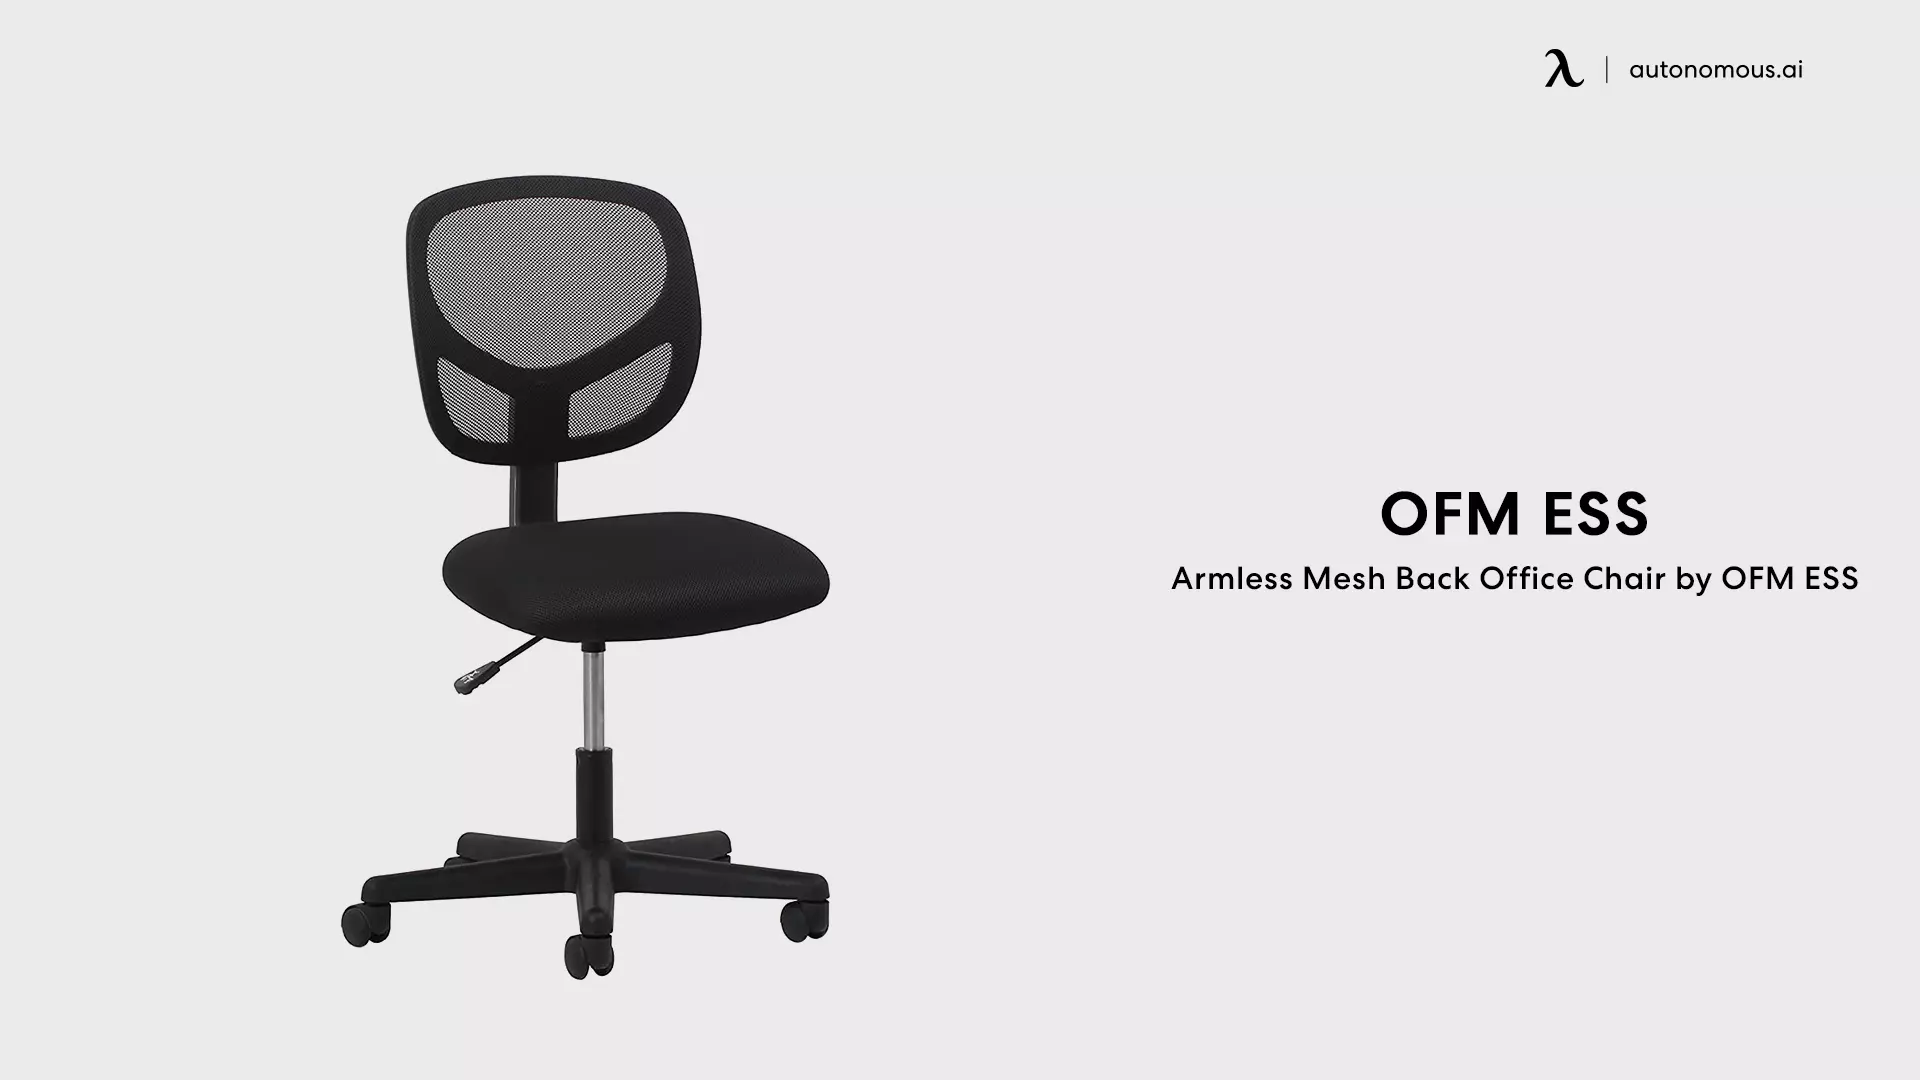 Armless Mesh Back Office Chair by OFM ESS